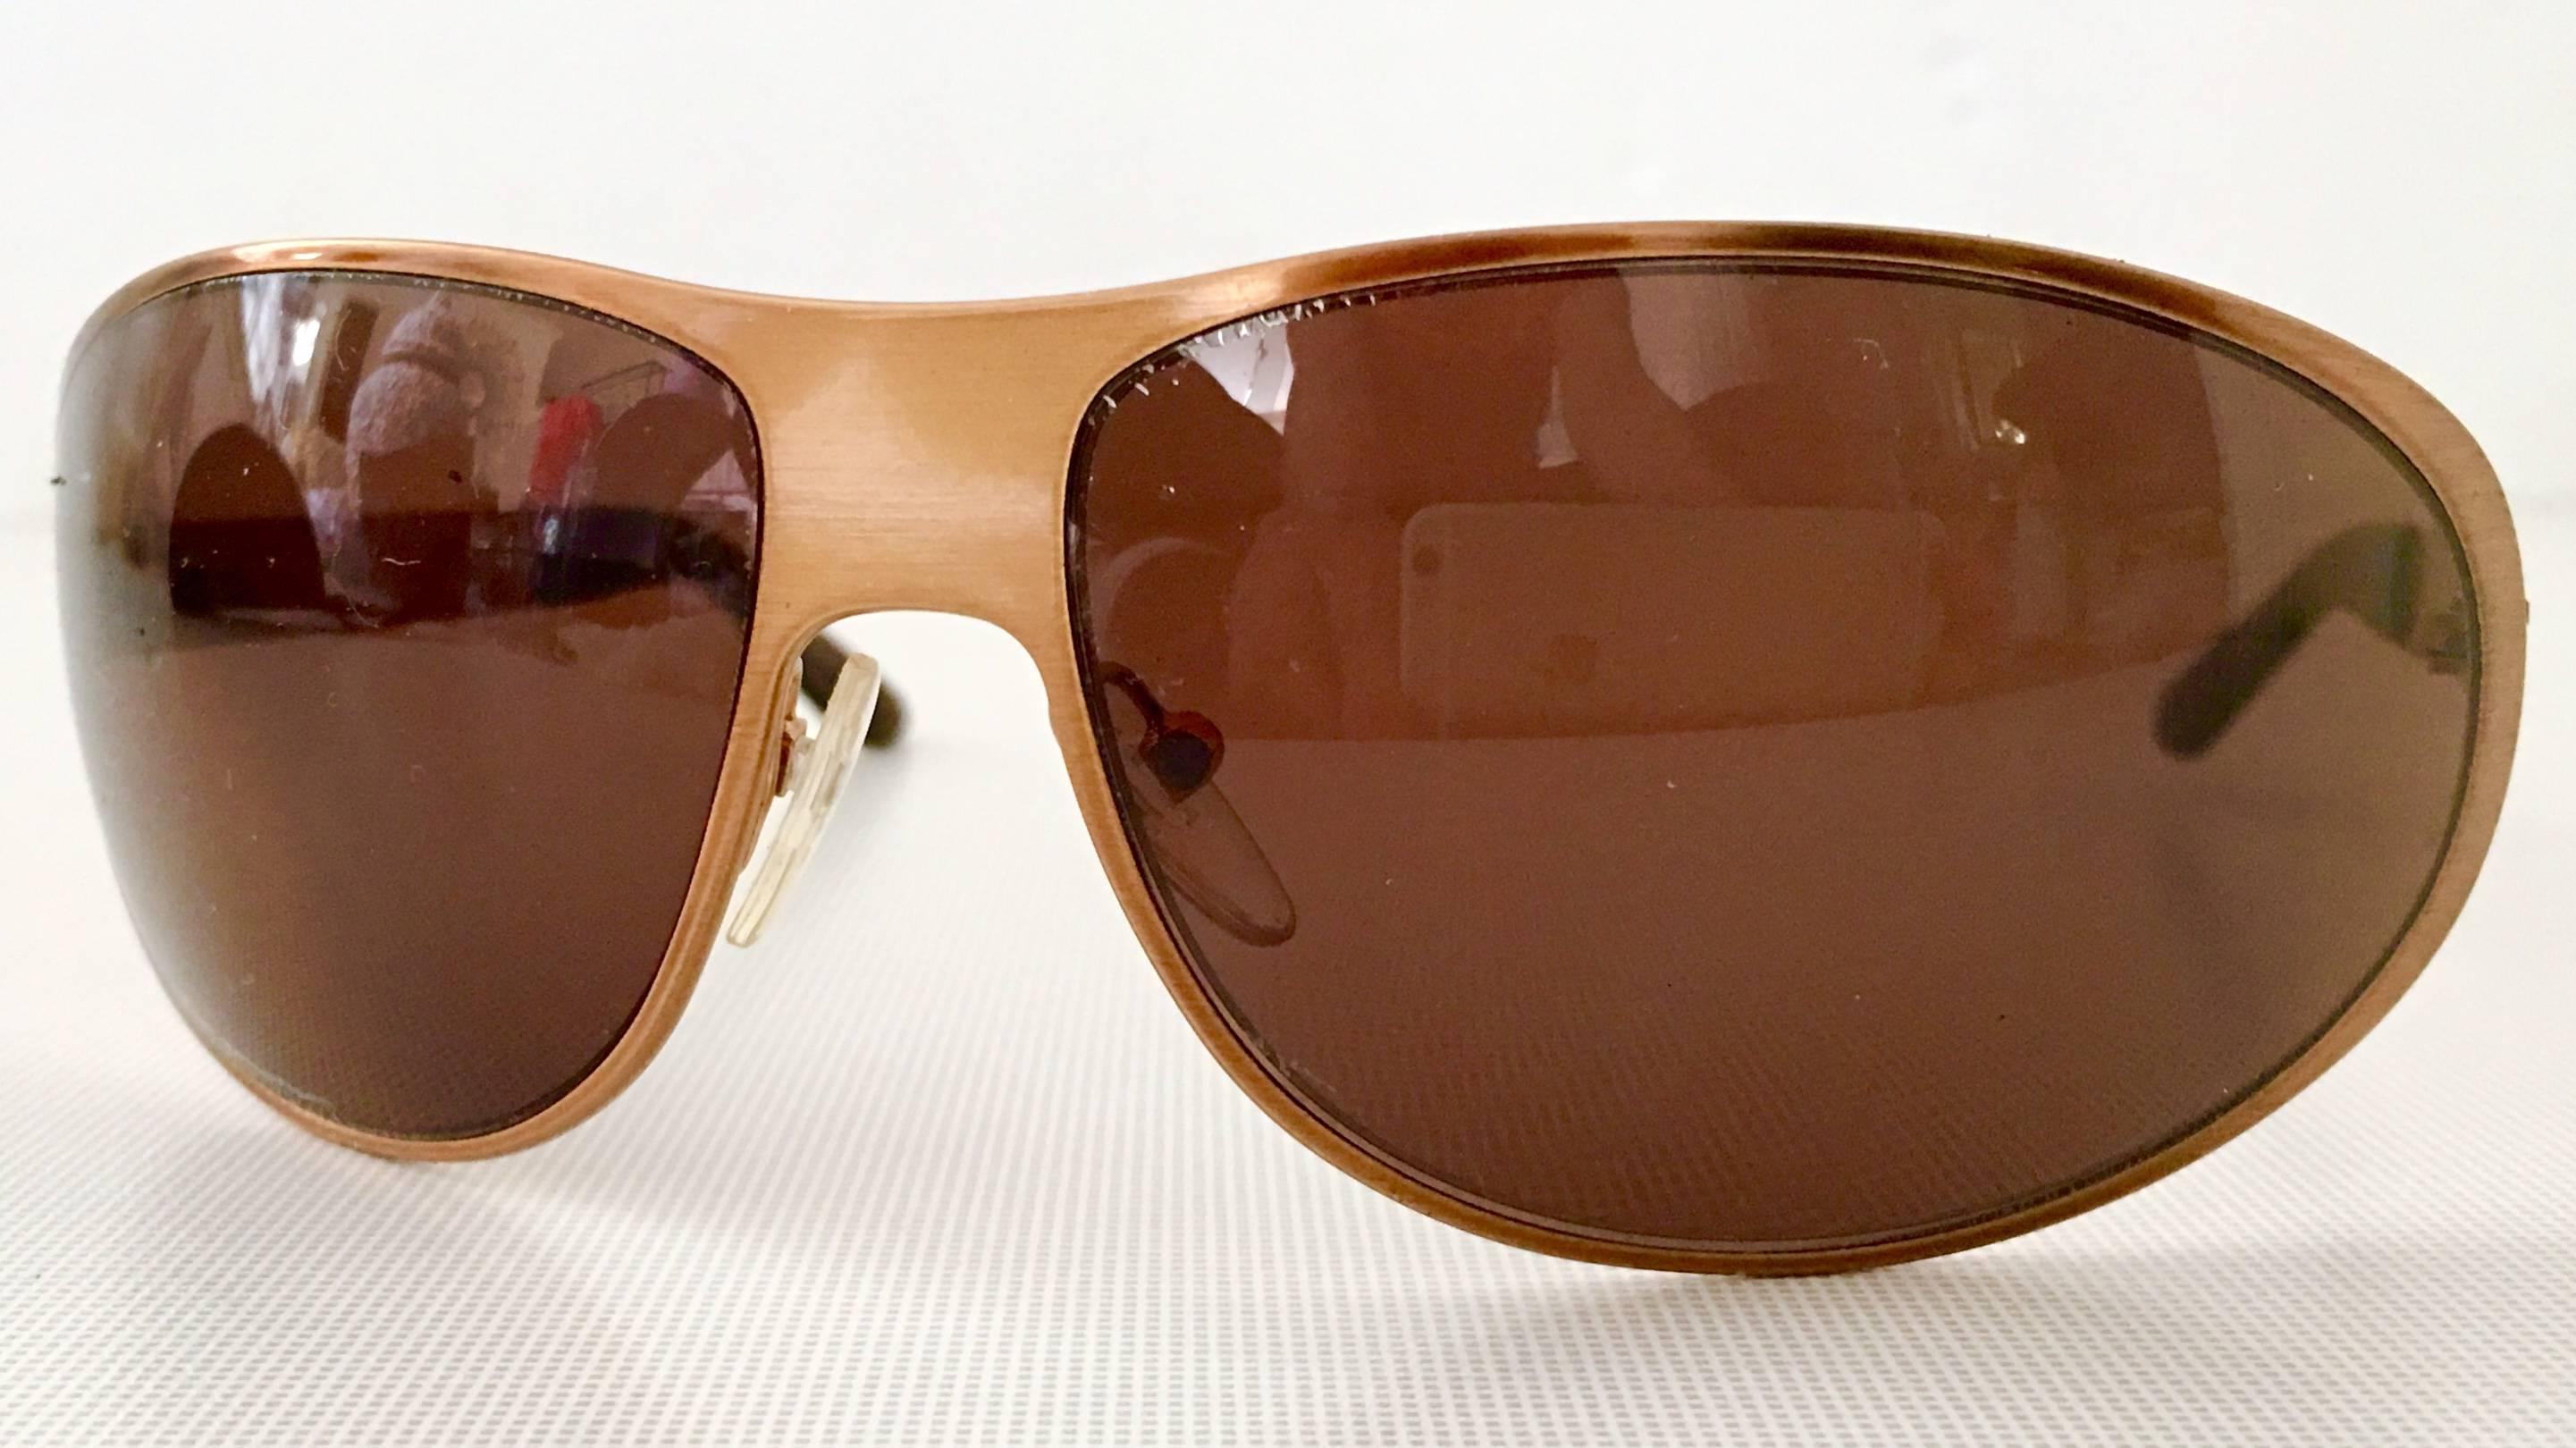 20th Century Prada Rose Gold & Swarovski Crystal Sunglasses, Made In Italy. These sporty but sophisticated sunglasses have a brushed rose gold finish, brown lens and citrine colored Swarovski crystal rhinestone detail. a brown faux tortoise tone